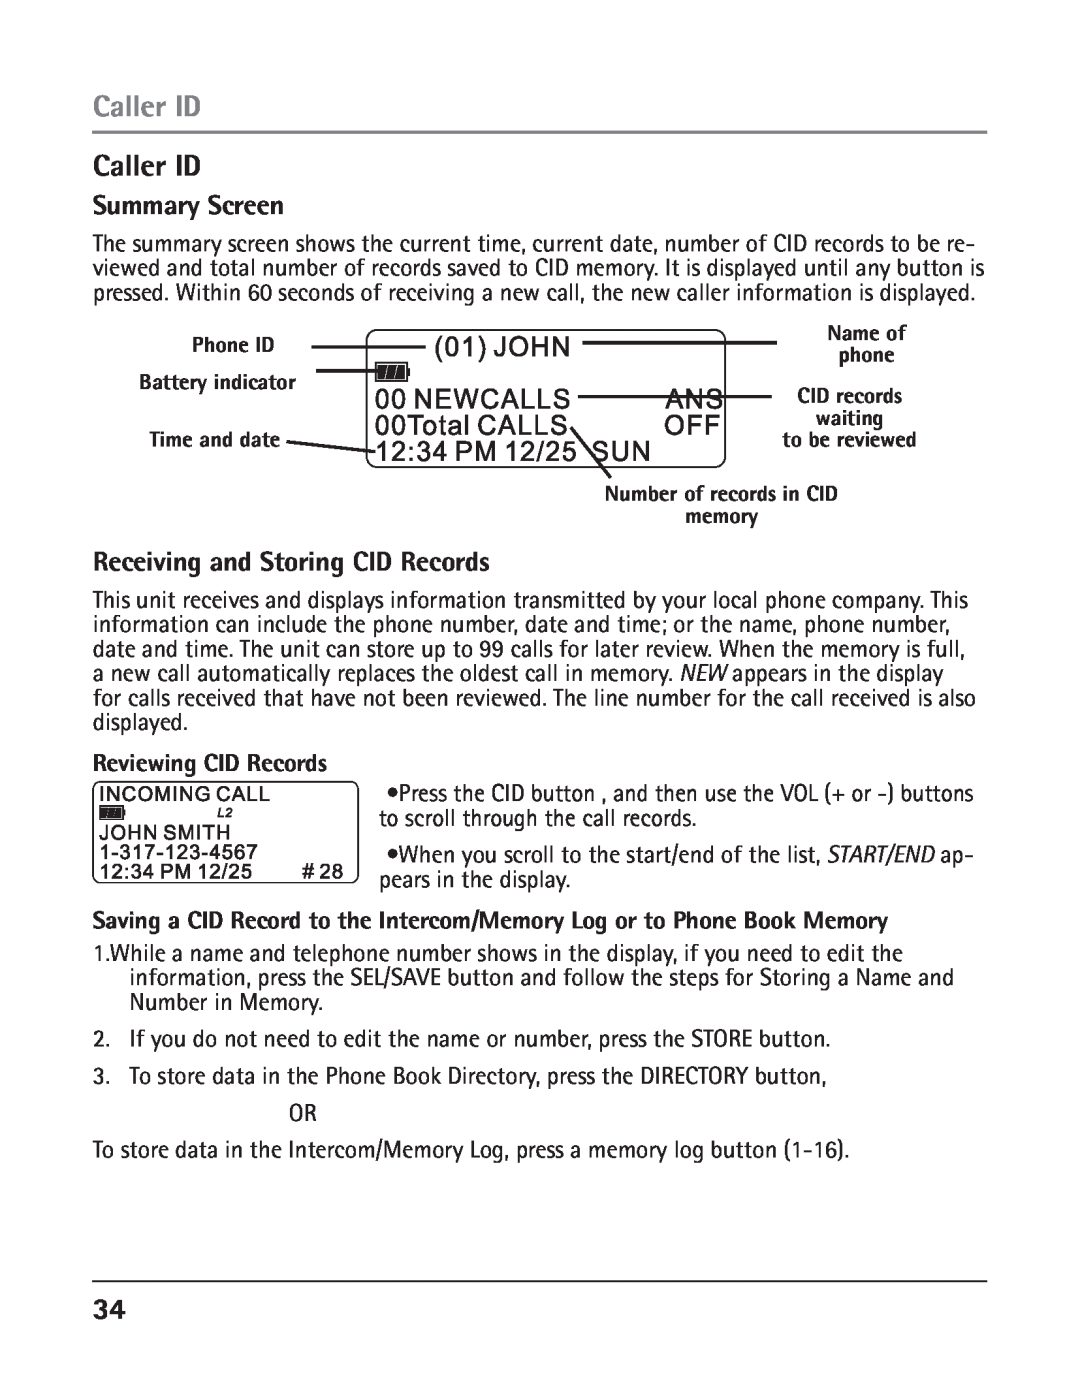 RCA 25425RE1A manual Caller ID, Summary Screen, Receiving and Storing CID Records, Reviewing CID Records 